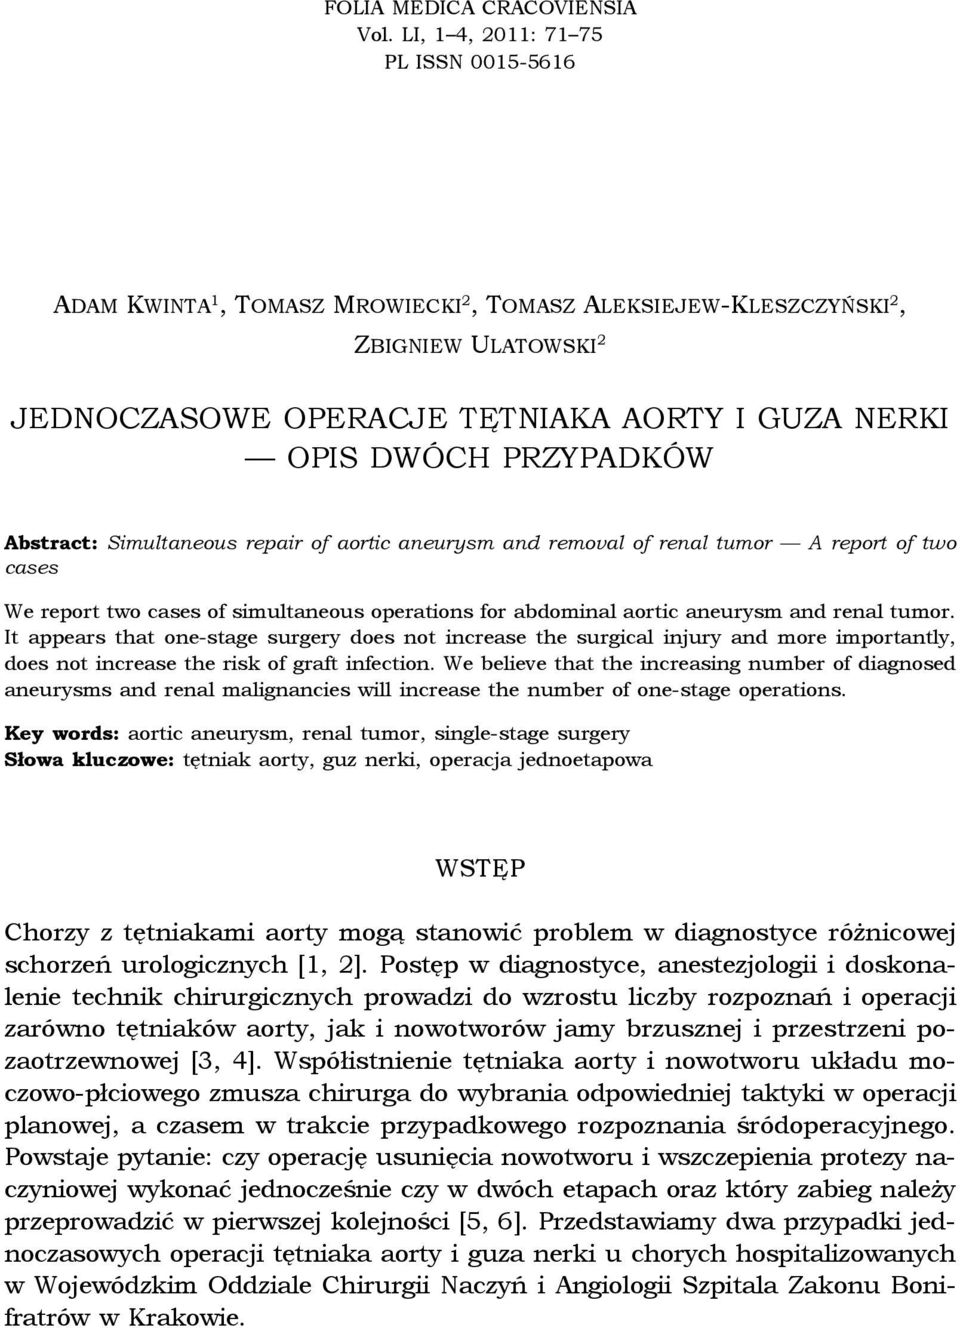 PRZYPADKÓW Abstract: Simultaneous repair of aortic aneurysm and removal of renal tumor A report of two cases We report two cases of simultaneous operations for abdominal aortic aneurysm and renal